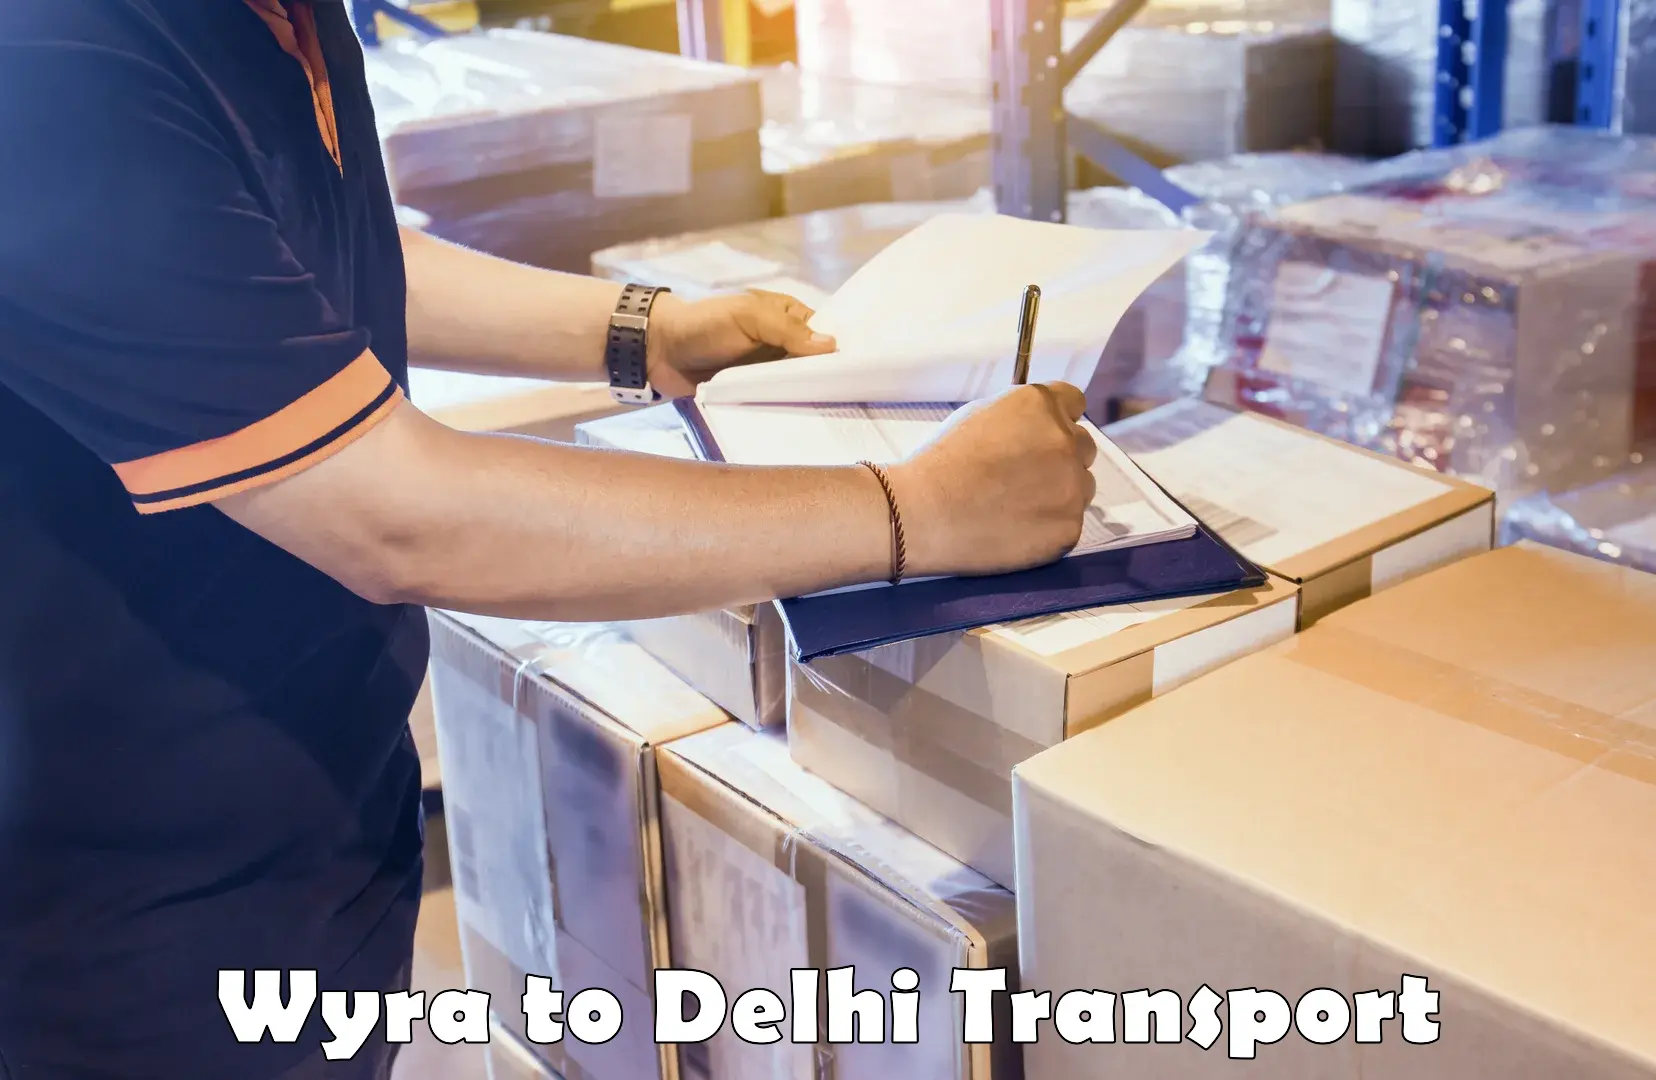 Part load transport service in India Wyra to Delhi